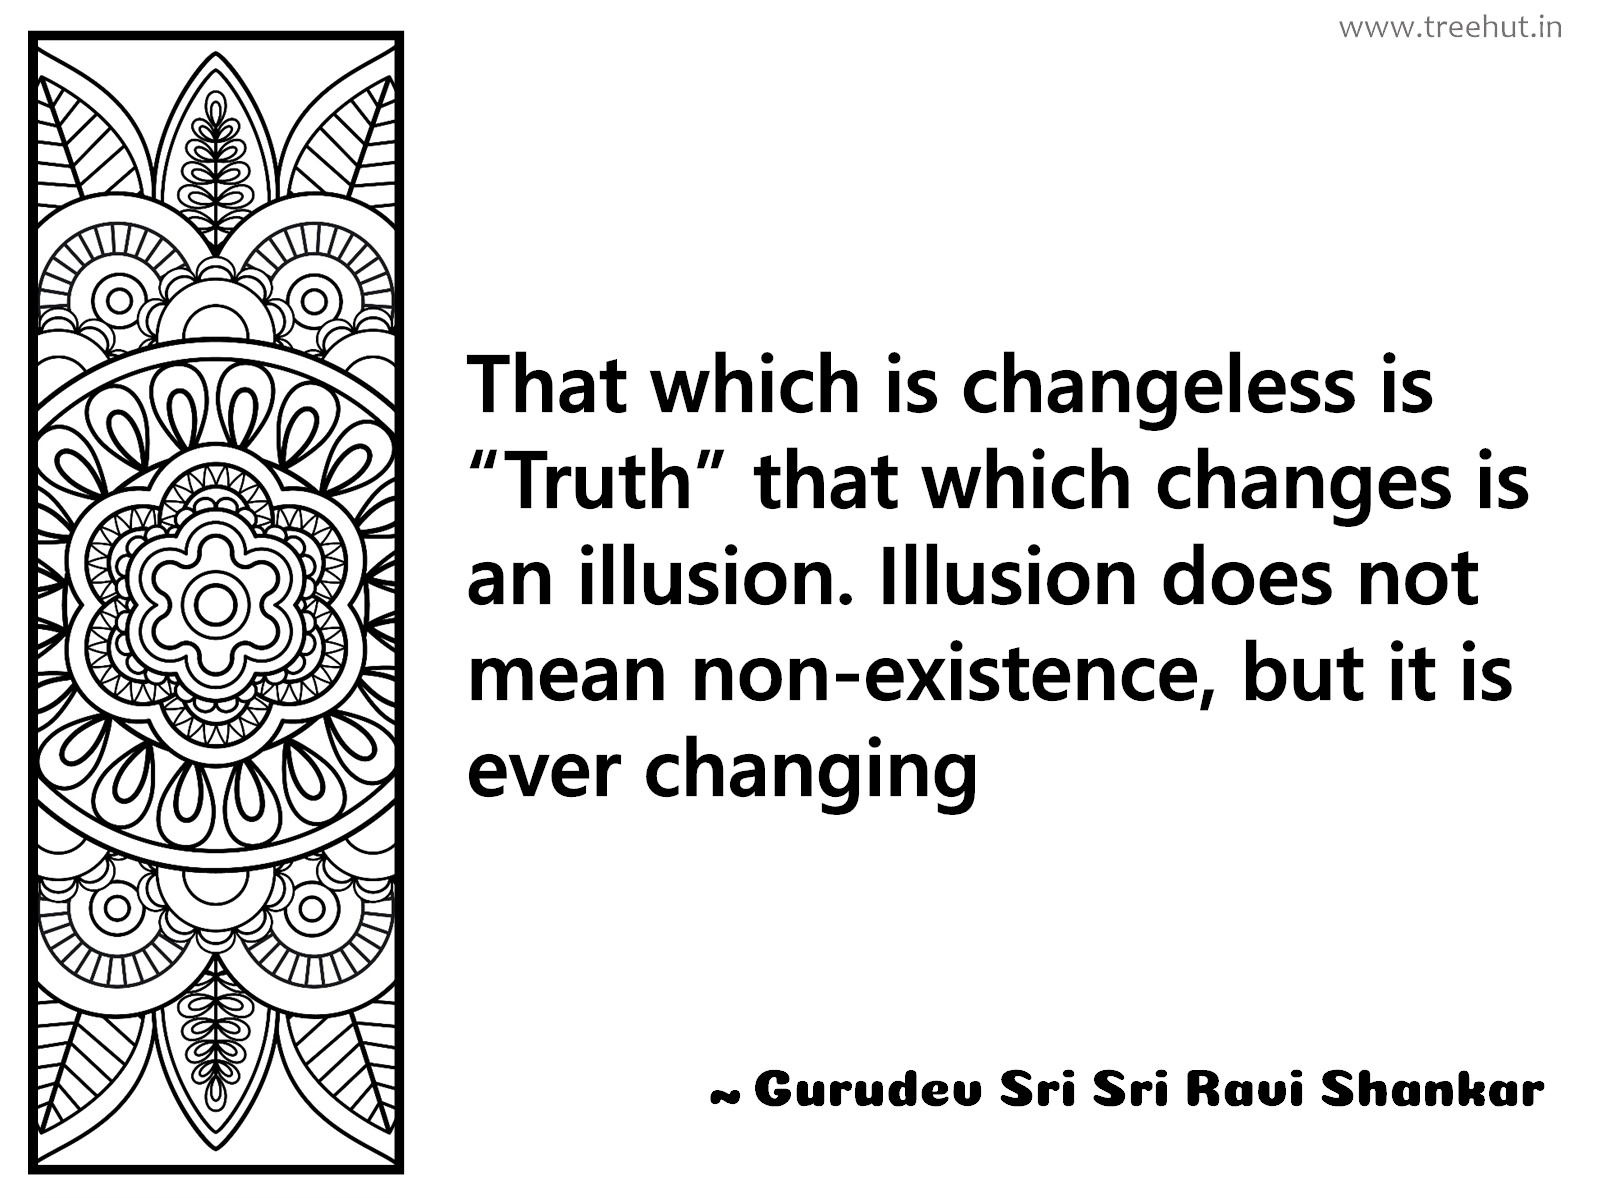 That which is changeless is “Truth” that which changes is an illusion. Illusion does not mean non-existence, but it is ever changing Inspirational Quote by Gurudev Sri Sri Ravi Shankar, coloring pages